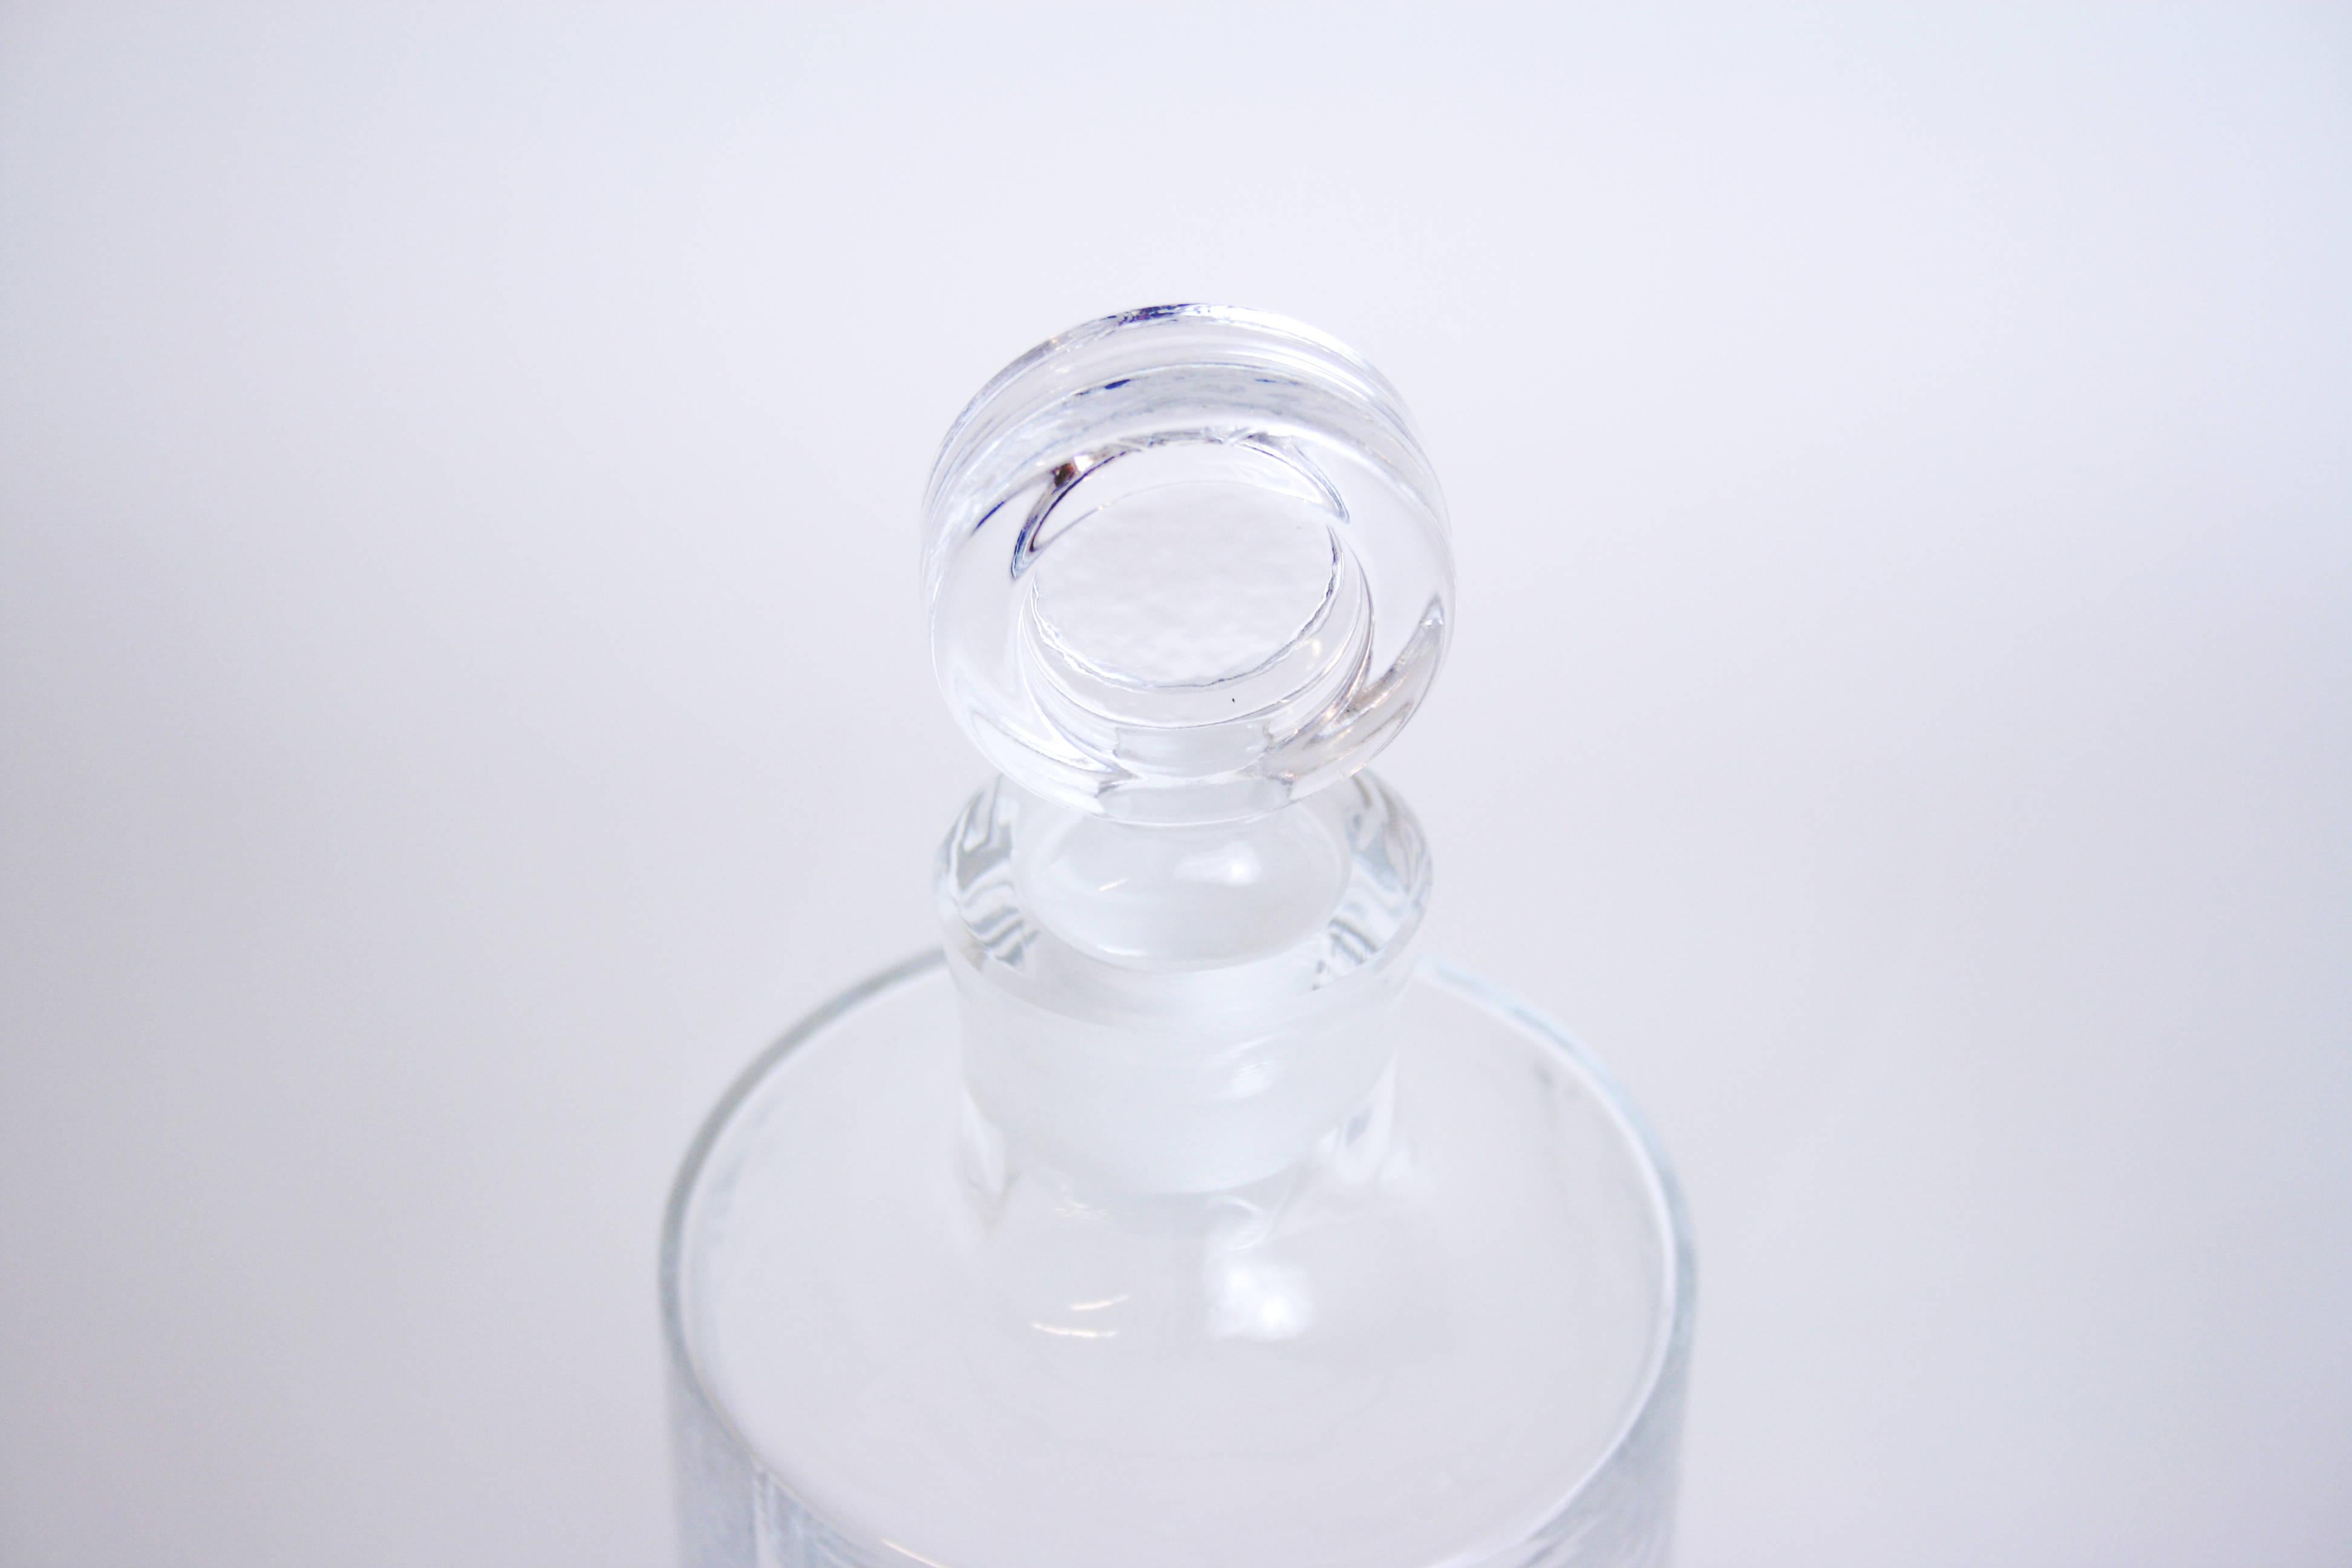 Bottle with stopper Riedel Austria design glass, Vienna, 1980s. One of the rare flagons of this great manufacturer whose innovations have revolutionized the glass and drinking culture. This high quality object is still in nearly immaculate condition